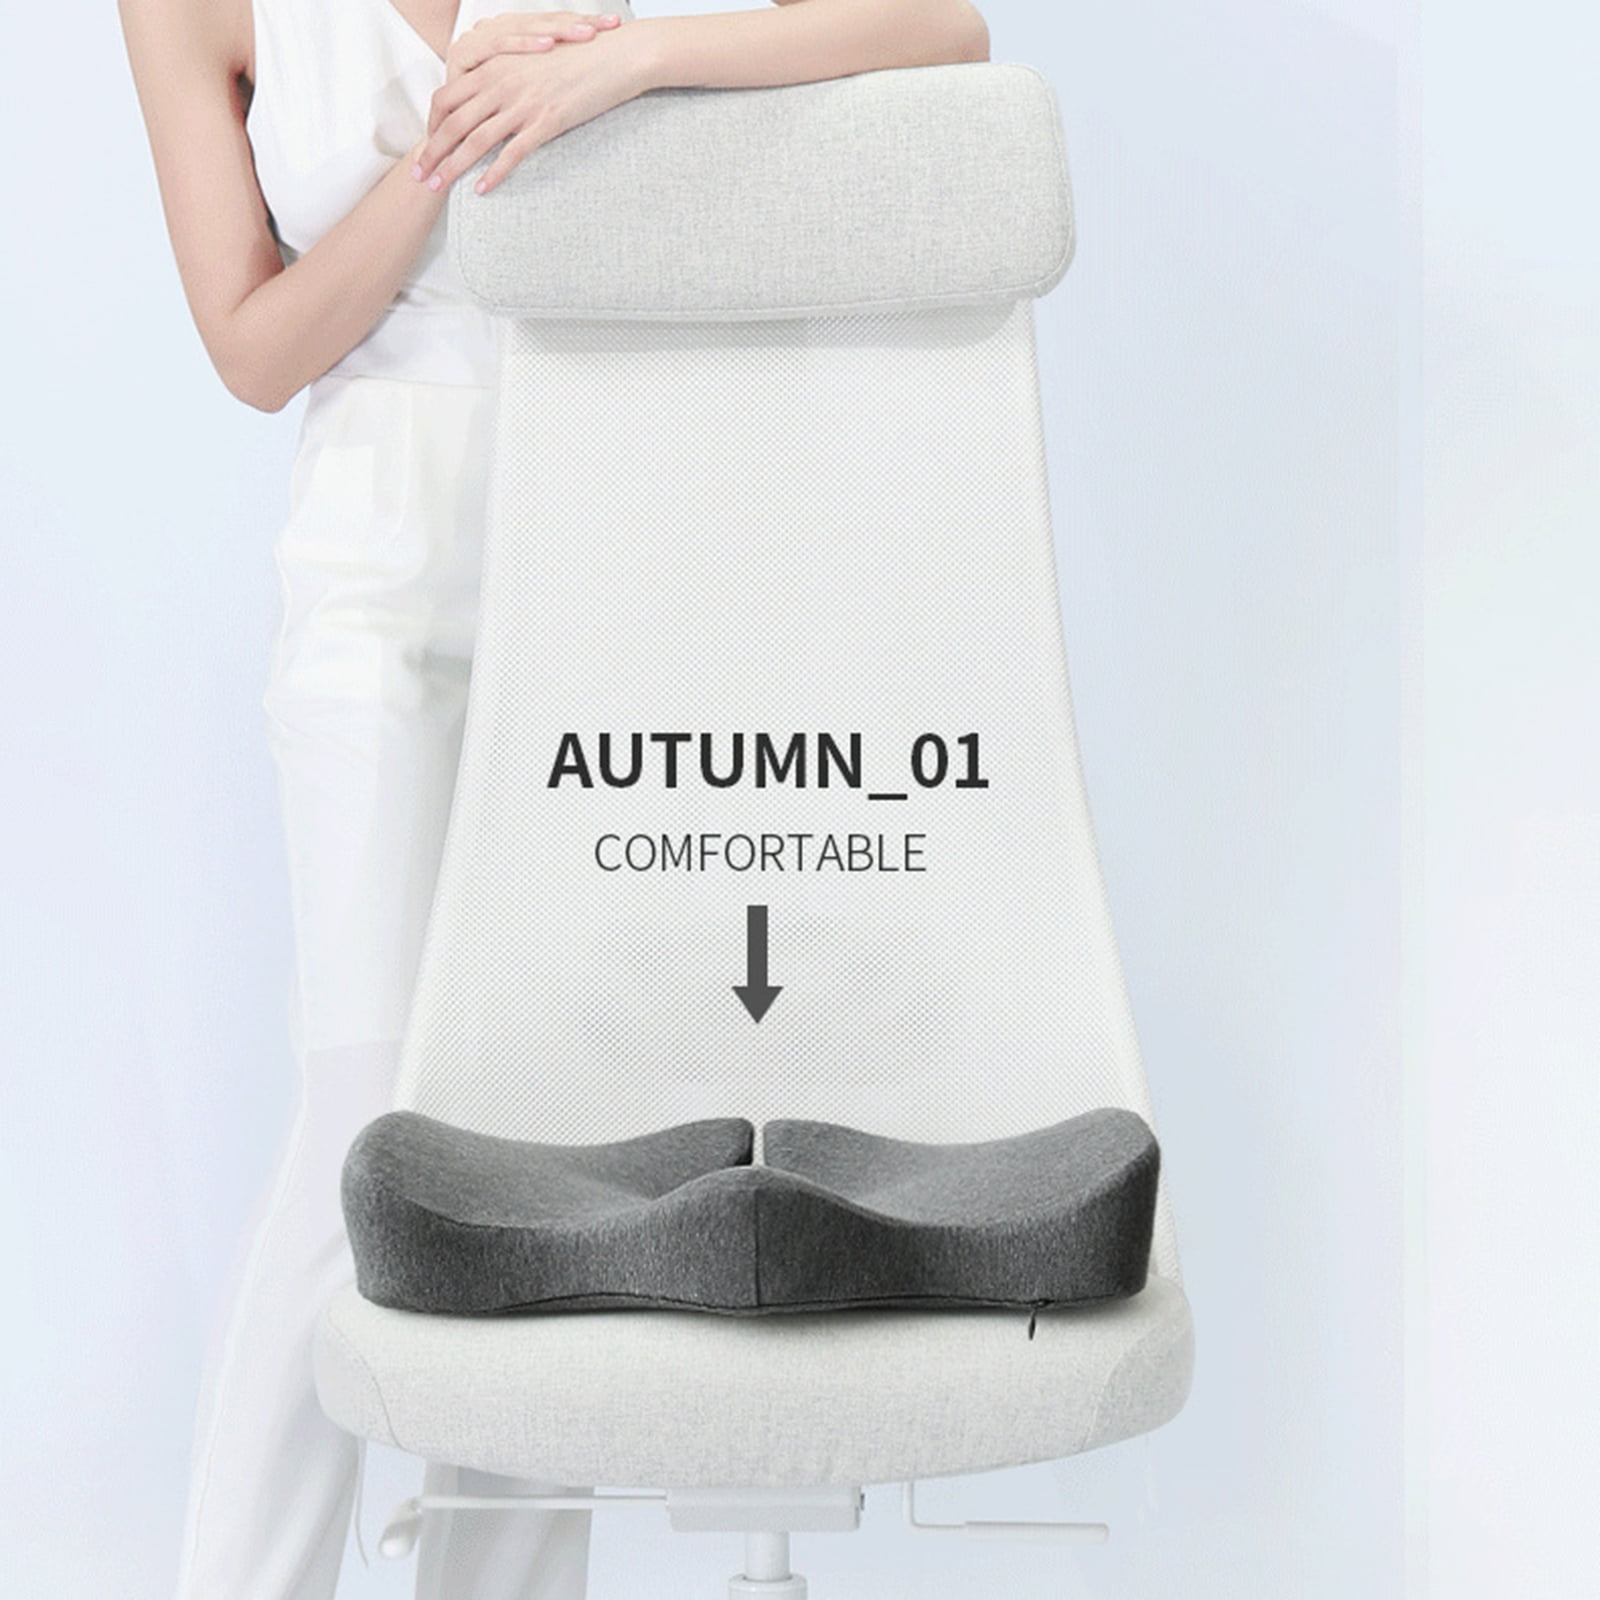 Seat Cushion, Office Chair Cushions Butt Pillow for Long Sitting, Memory  Foam Chair Pad for Back, Coccyx, Tailbone Pain Relief 12.59*18.11*16.54in 